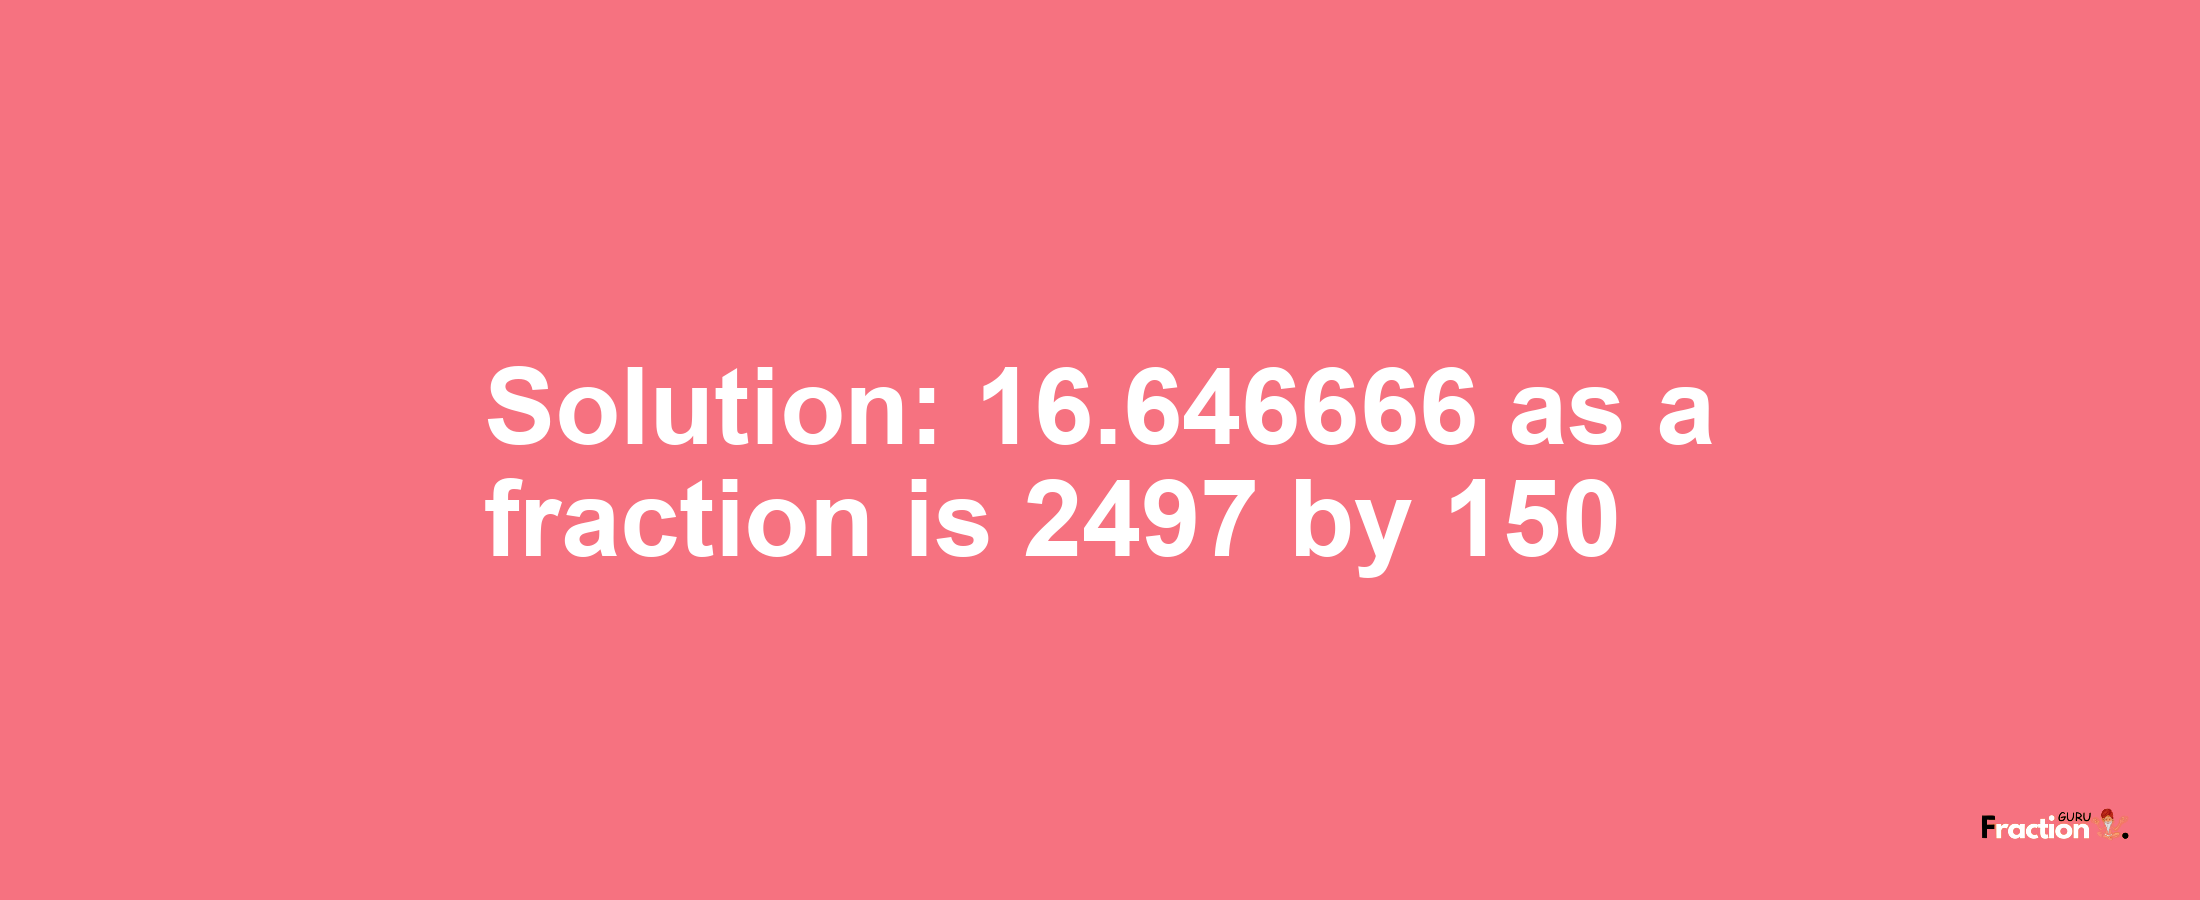 Solution:16.646666 as a fraction is 2497/150